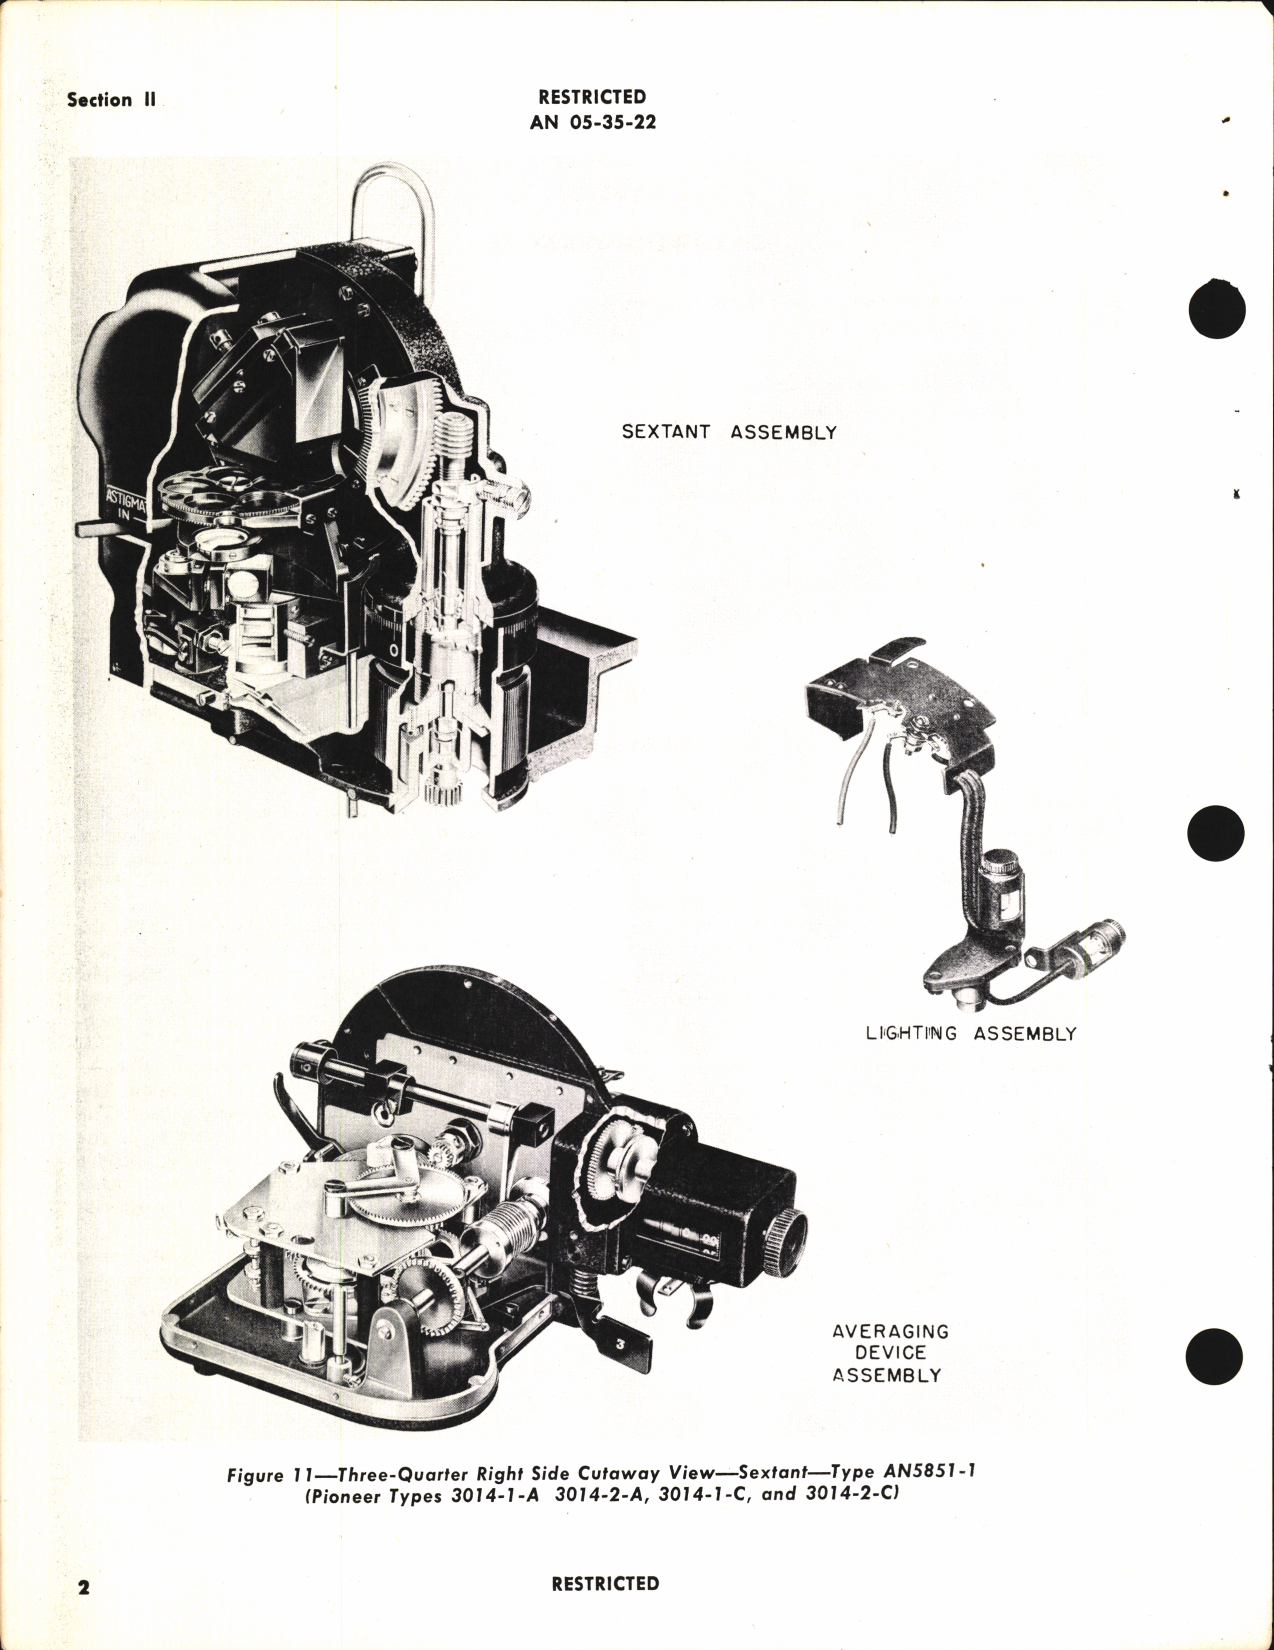 Sample page 6 from AirCorps Library document: Operation, Service, & Overhaul Instructions with Parts Catalog for AN5851-1 Aircraft Sextant